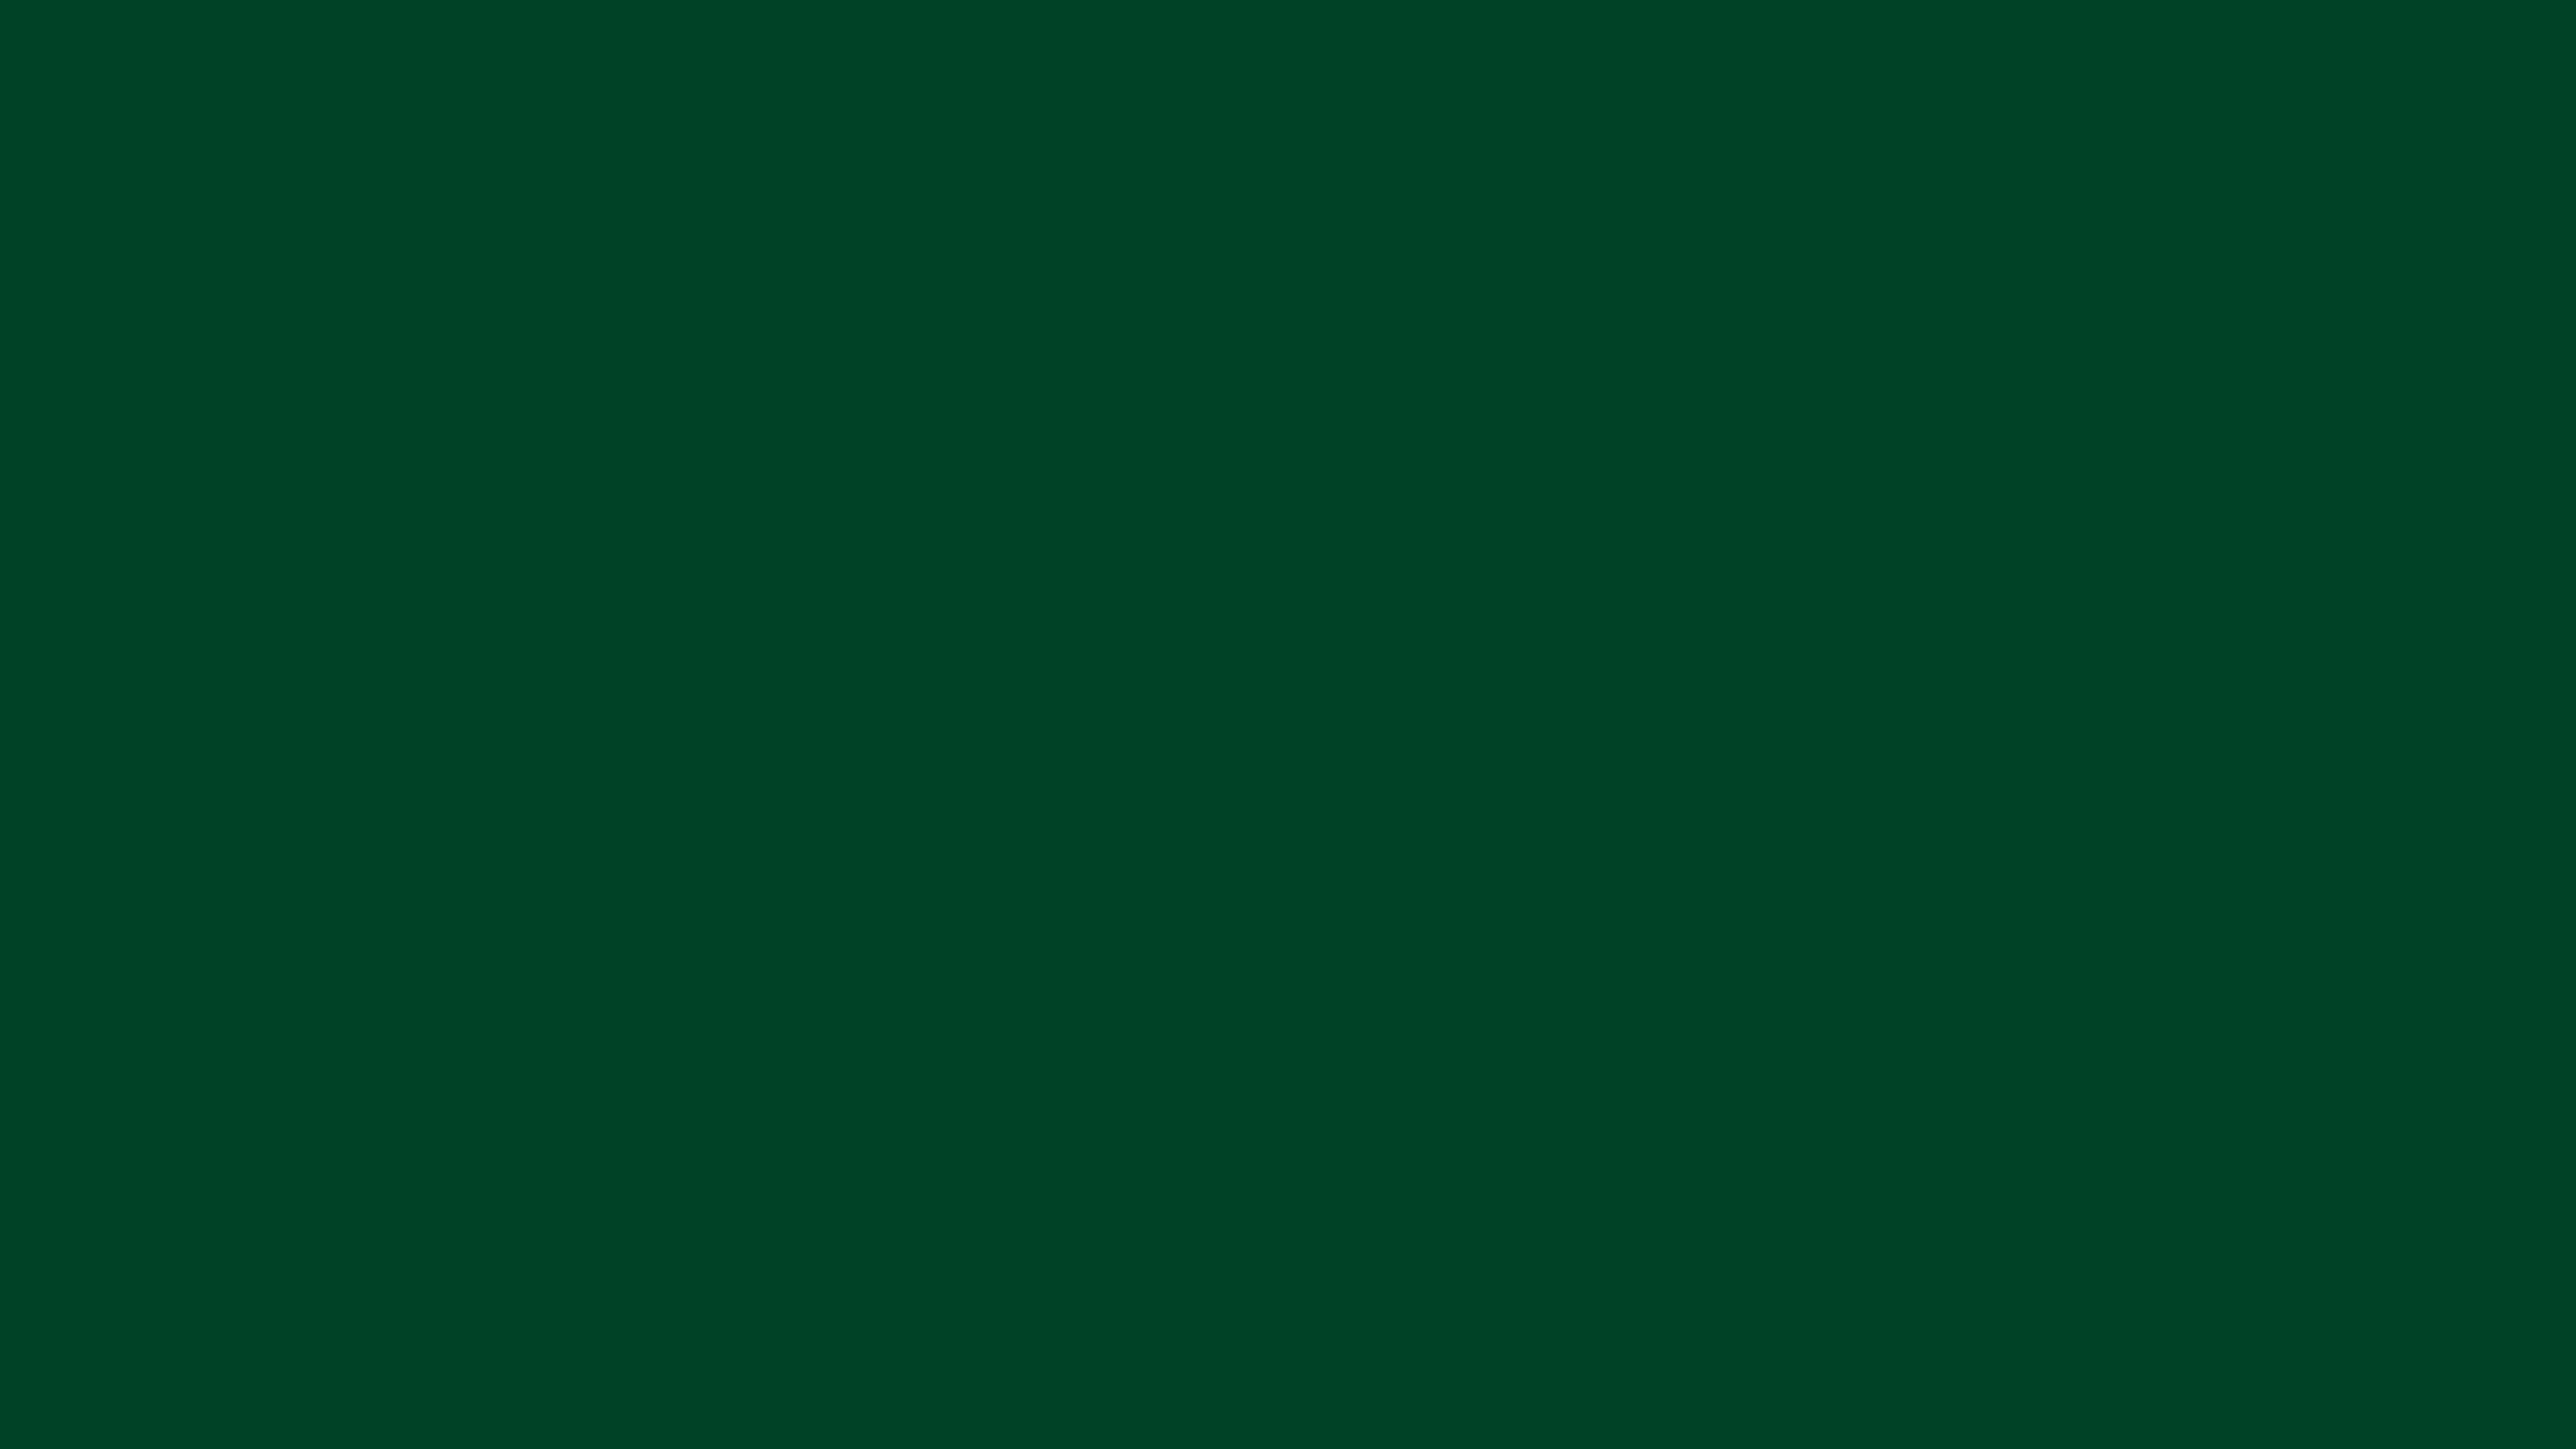 7680x4320 British Racing Green Solid Color Background